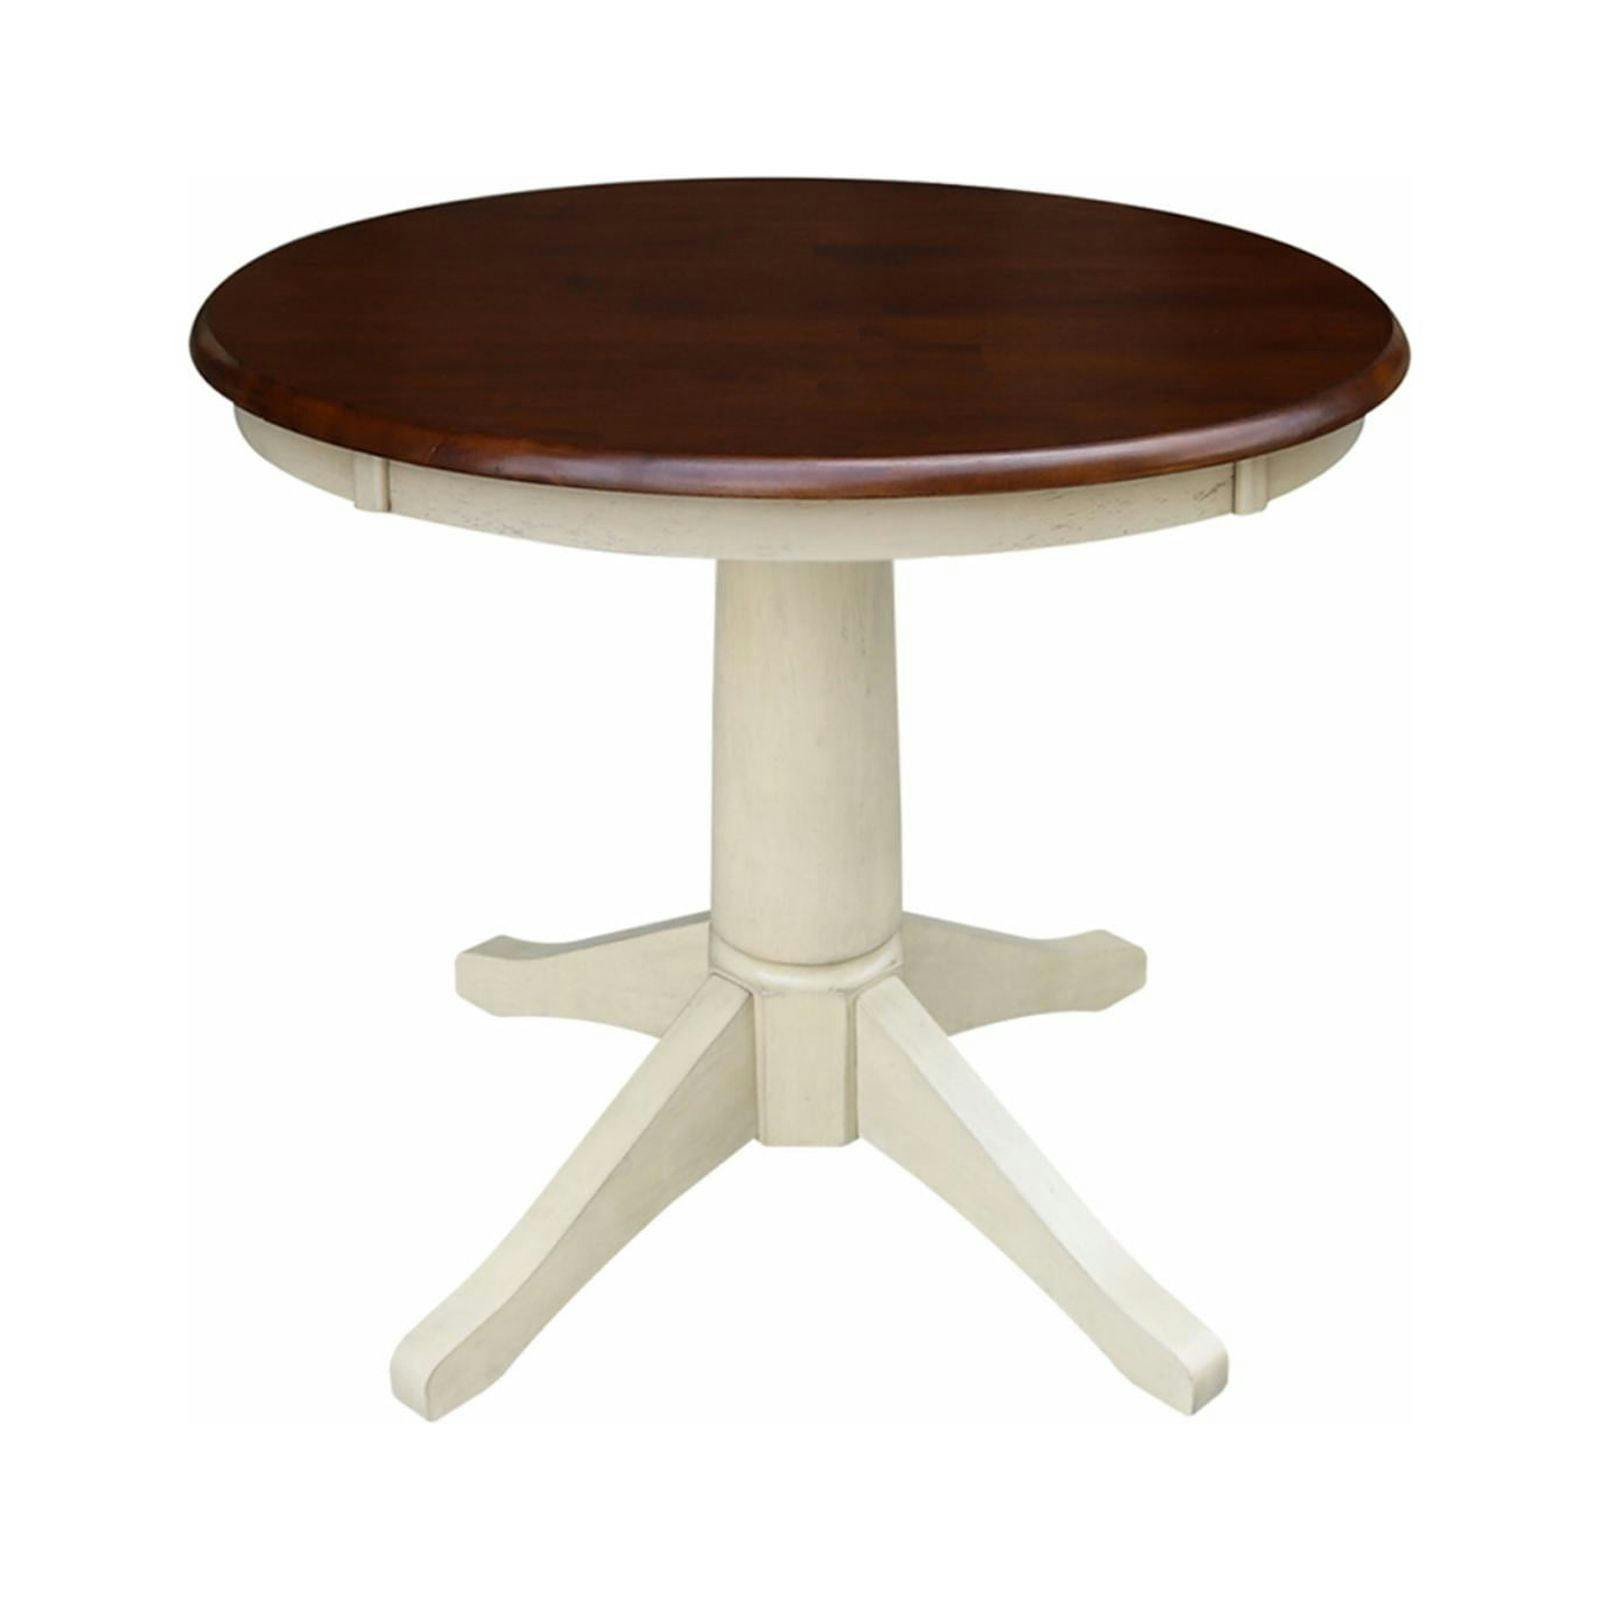 Antiqued Almond & Espresso 30" Round Wood Pedestal Dining Table